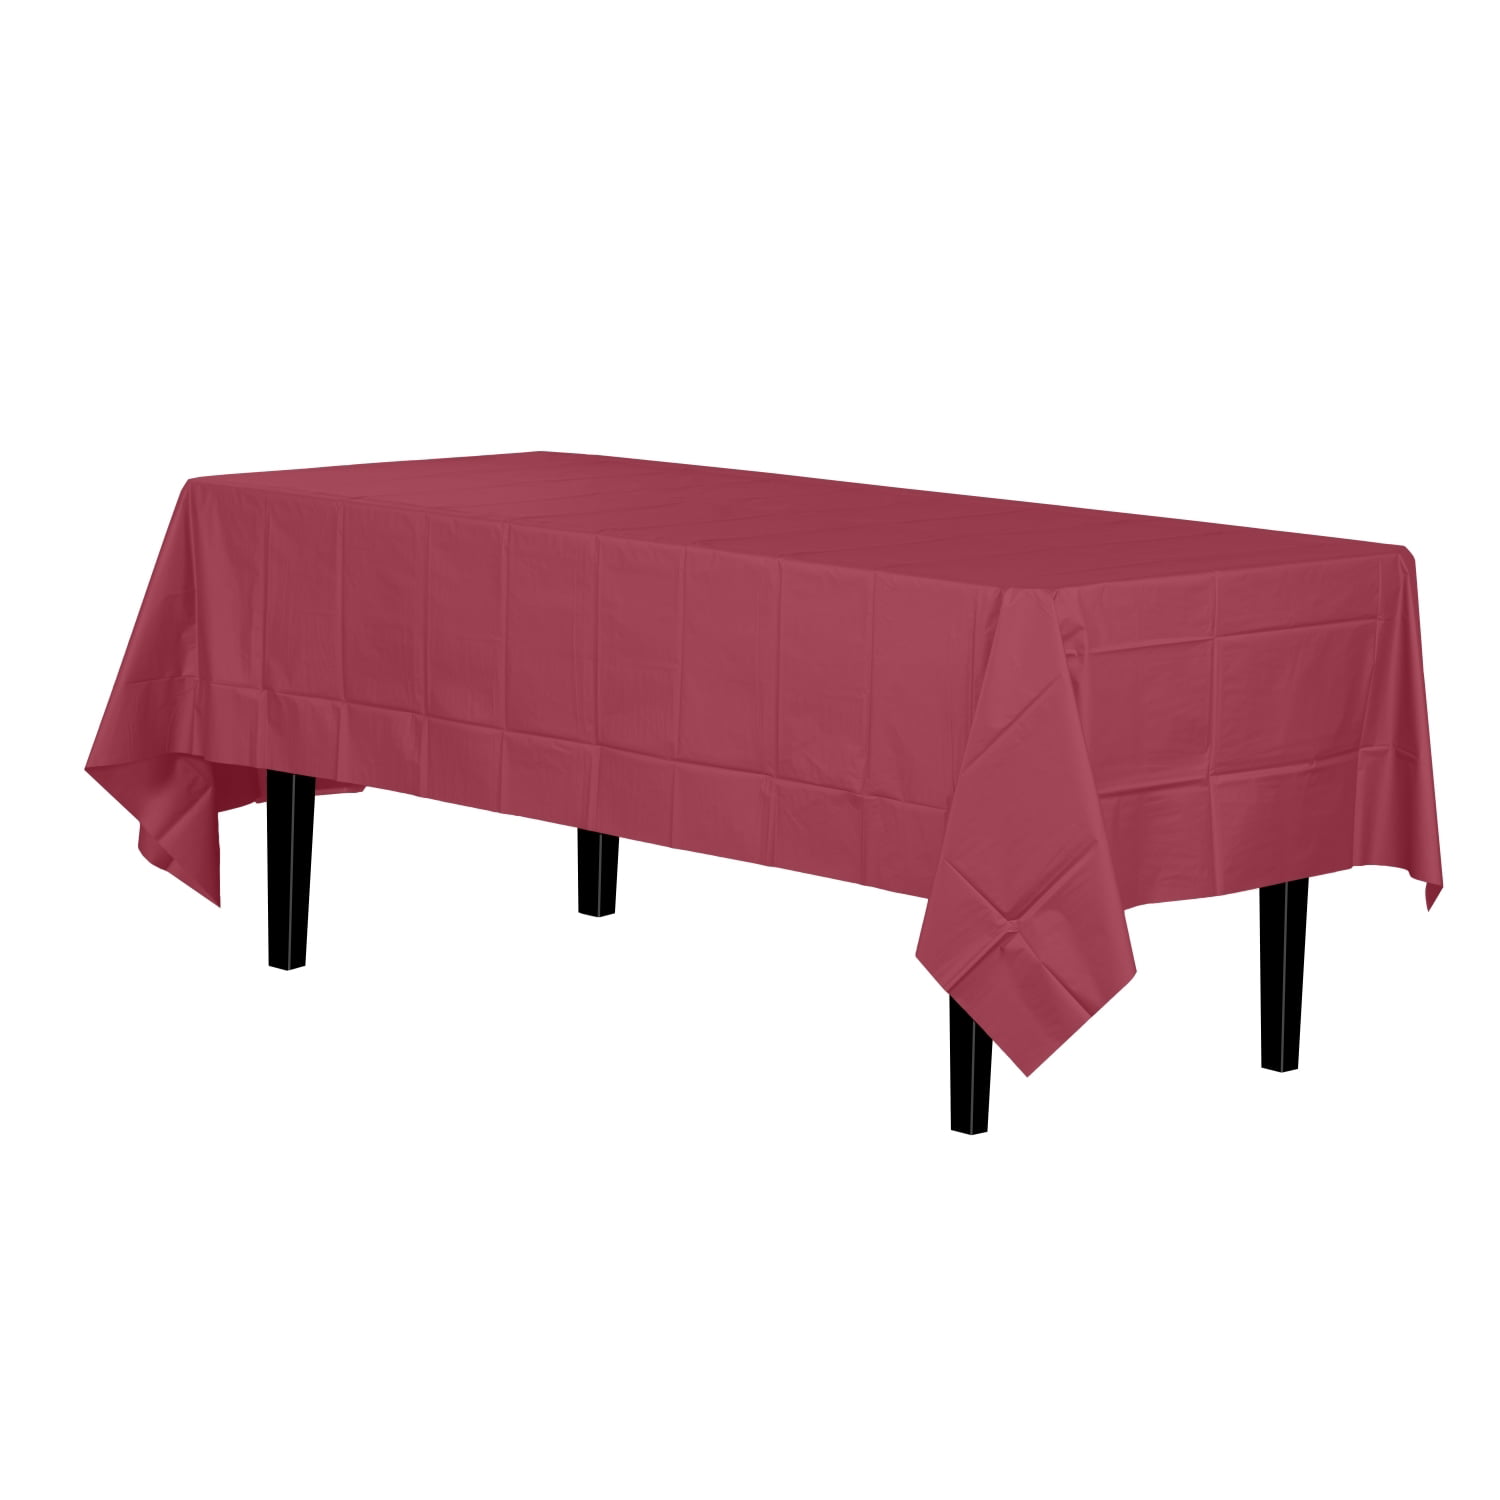 Burgundy Plastic Tablecloth 6 Pack Weddings Engineered to Minimize Transparency and Tears | 54” x 108” Premium Disposable Plastic Table Cover for Parties Art Projects